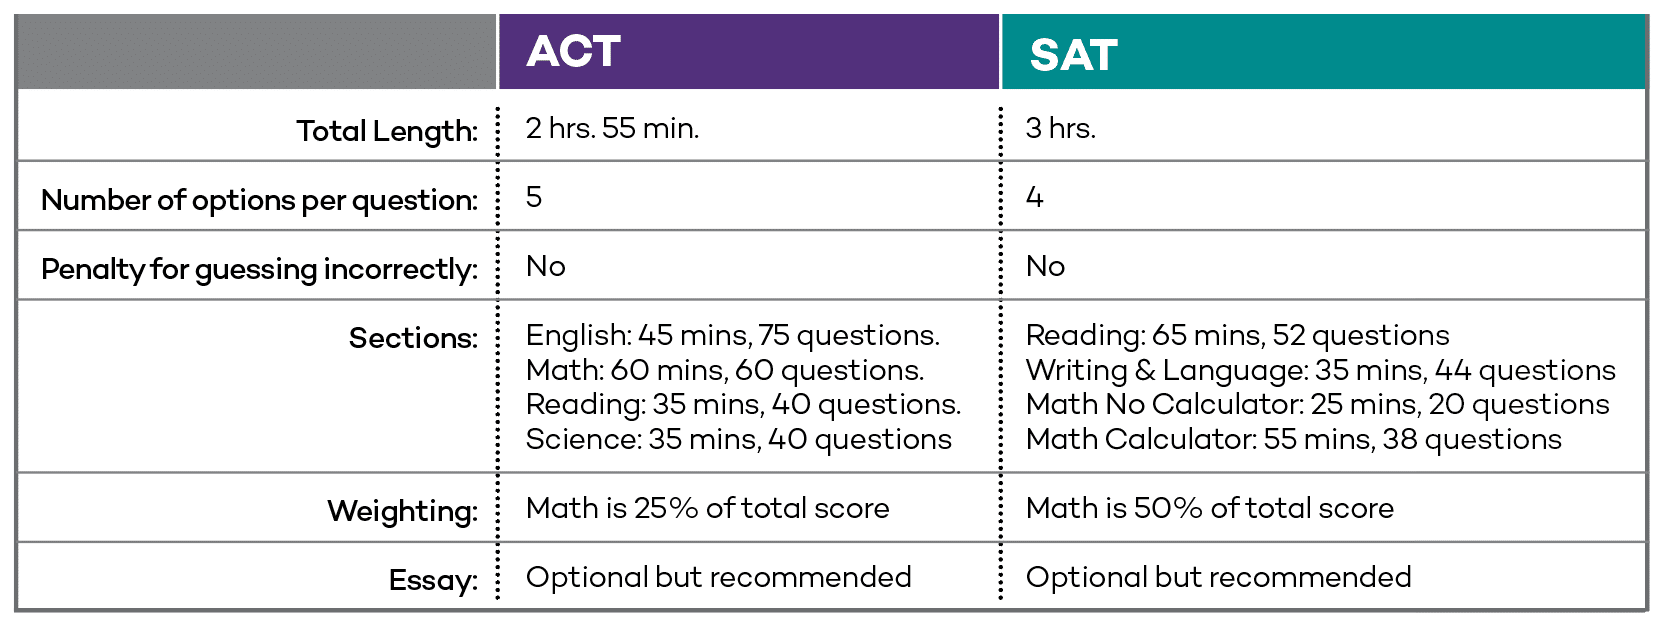 ACT: Total Length-2 hrs. 55 min., Number of options per question-5, Penalty for guessing inforrectly-No, Sections-English 45 mins/75 questions; Math 60 mins/60 questions; Reading 35 mins/40 questions; Science 35 mins/40 questions, Weighting-Math is 25% of total score, Essay-Optional but recommended. SAT: Total Length-3 hrs, Number of options per question-4, Penalty for guessing incorrectly-No, Sections-Reading 65 mins/52 questions; Writing & Language 35 mins/44 questions; Math No Calculator 25 mins/20 questions; Math Calculator 55 mins/38 questions, Weighting-Math is 50% of total score, Essay-Optional but recommended